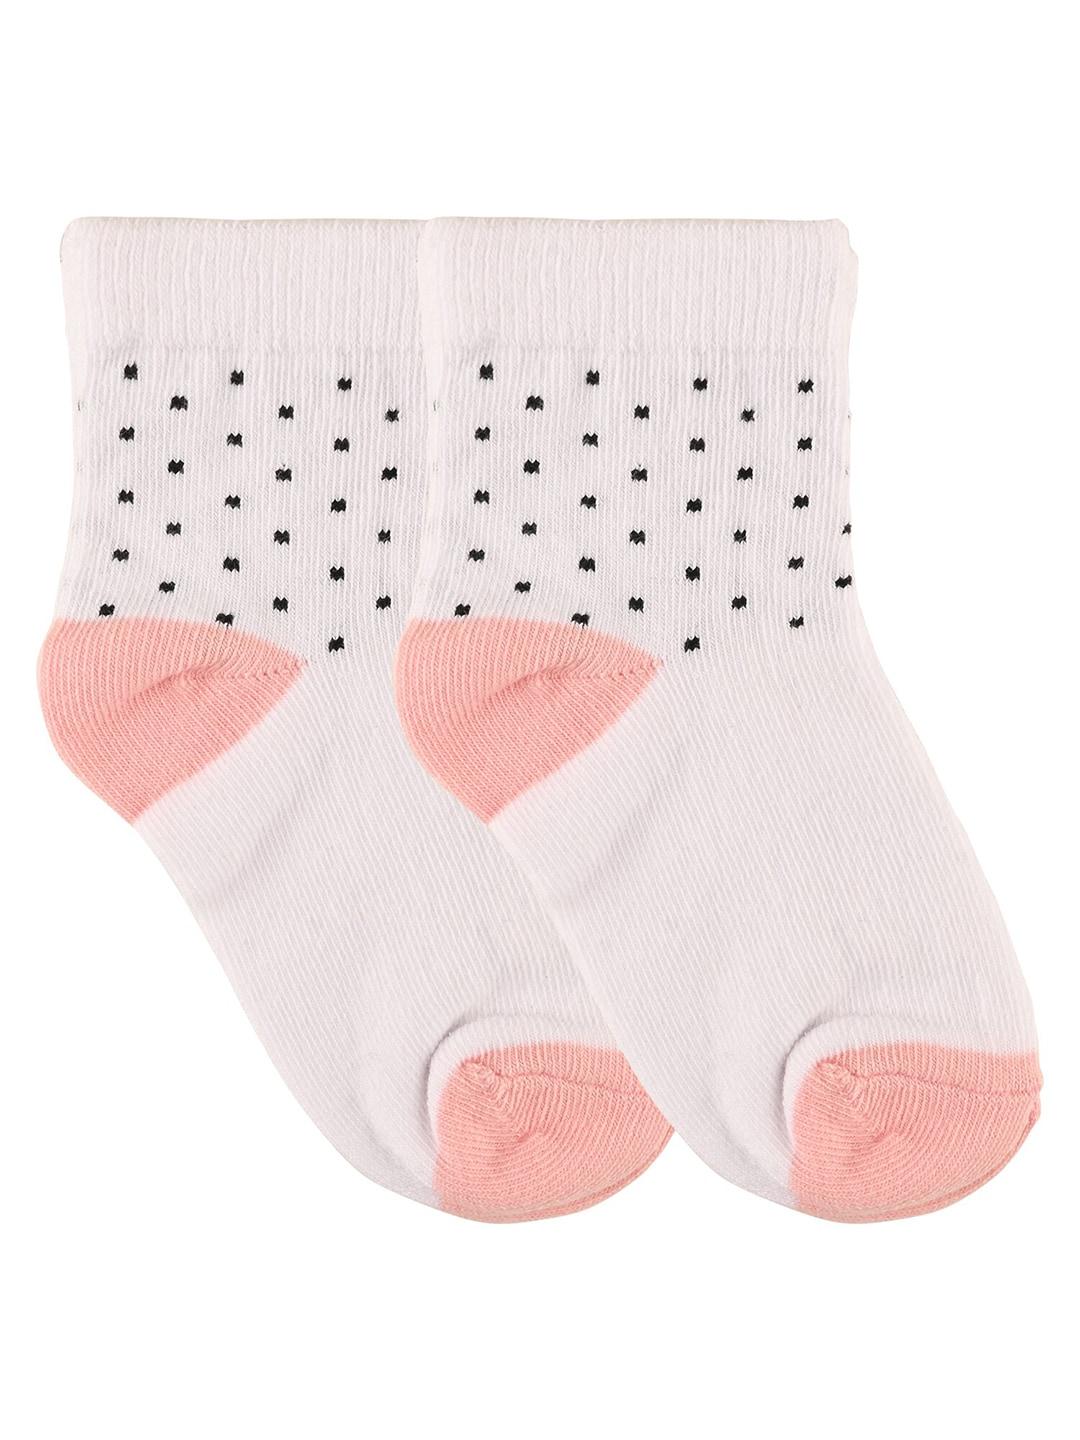 nuluv-girls-pack-of-2-patterned-anti-microbial-ankle-length-socks